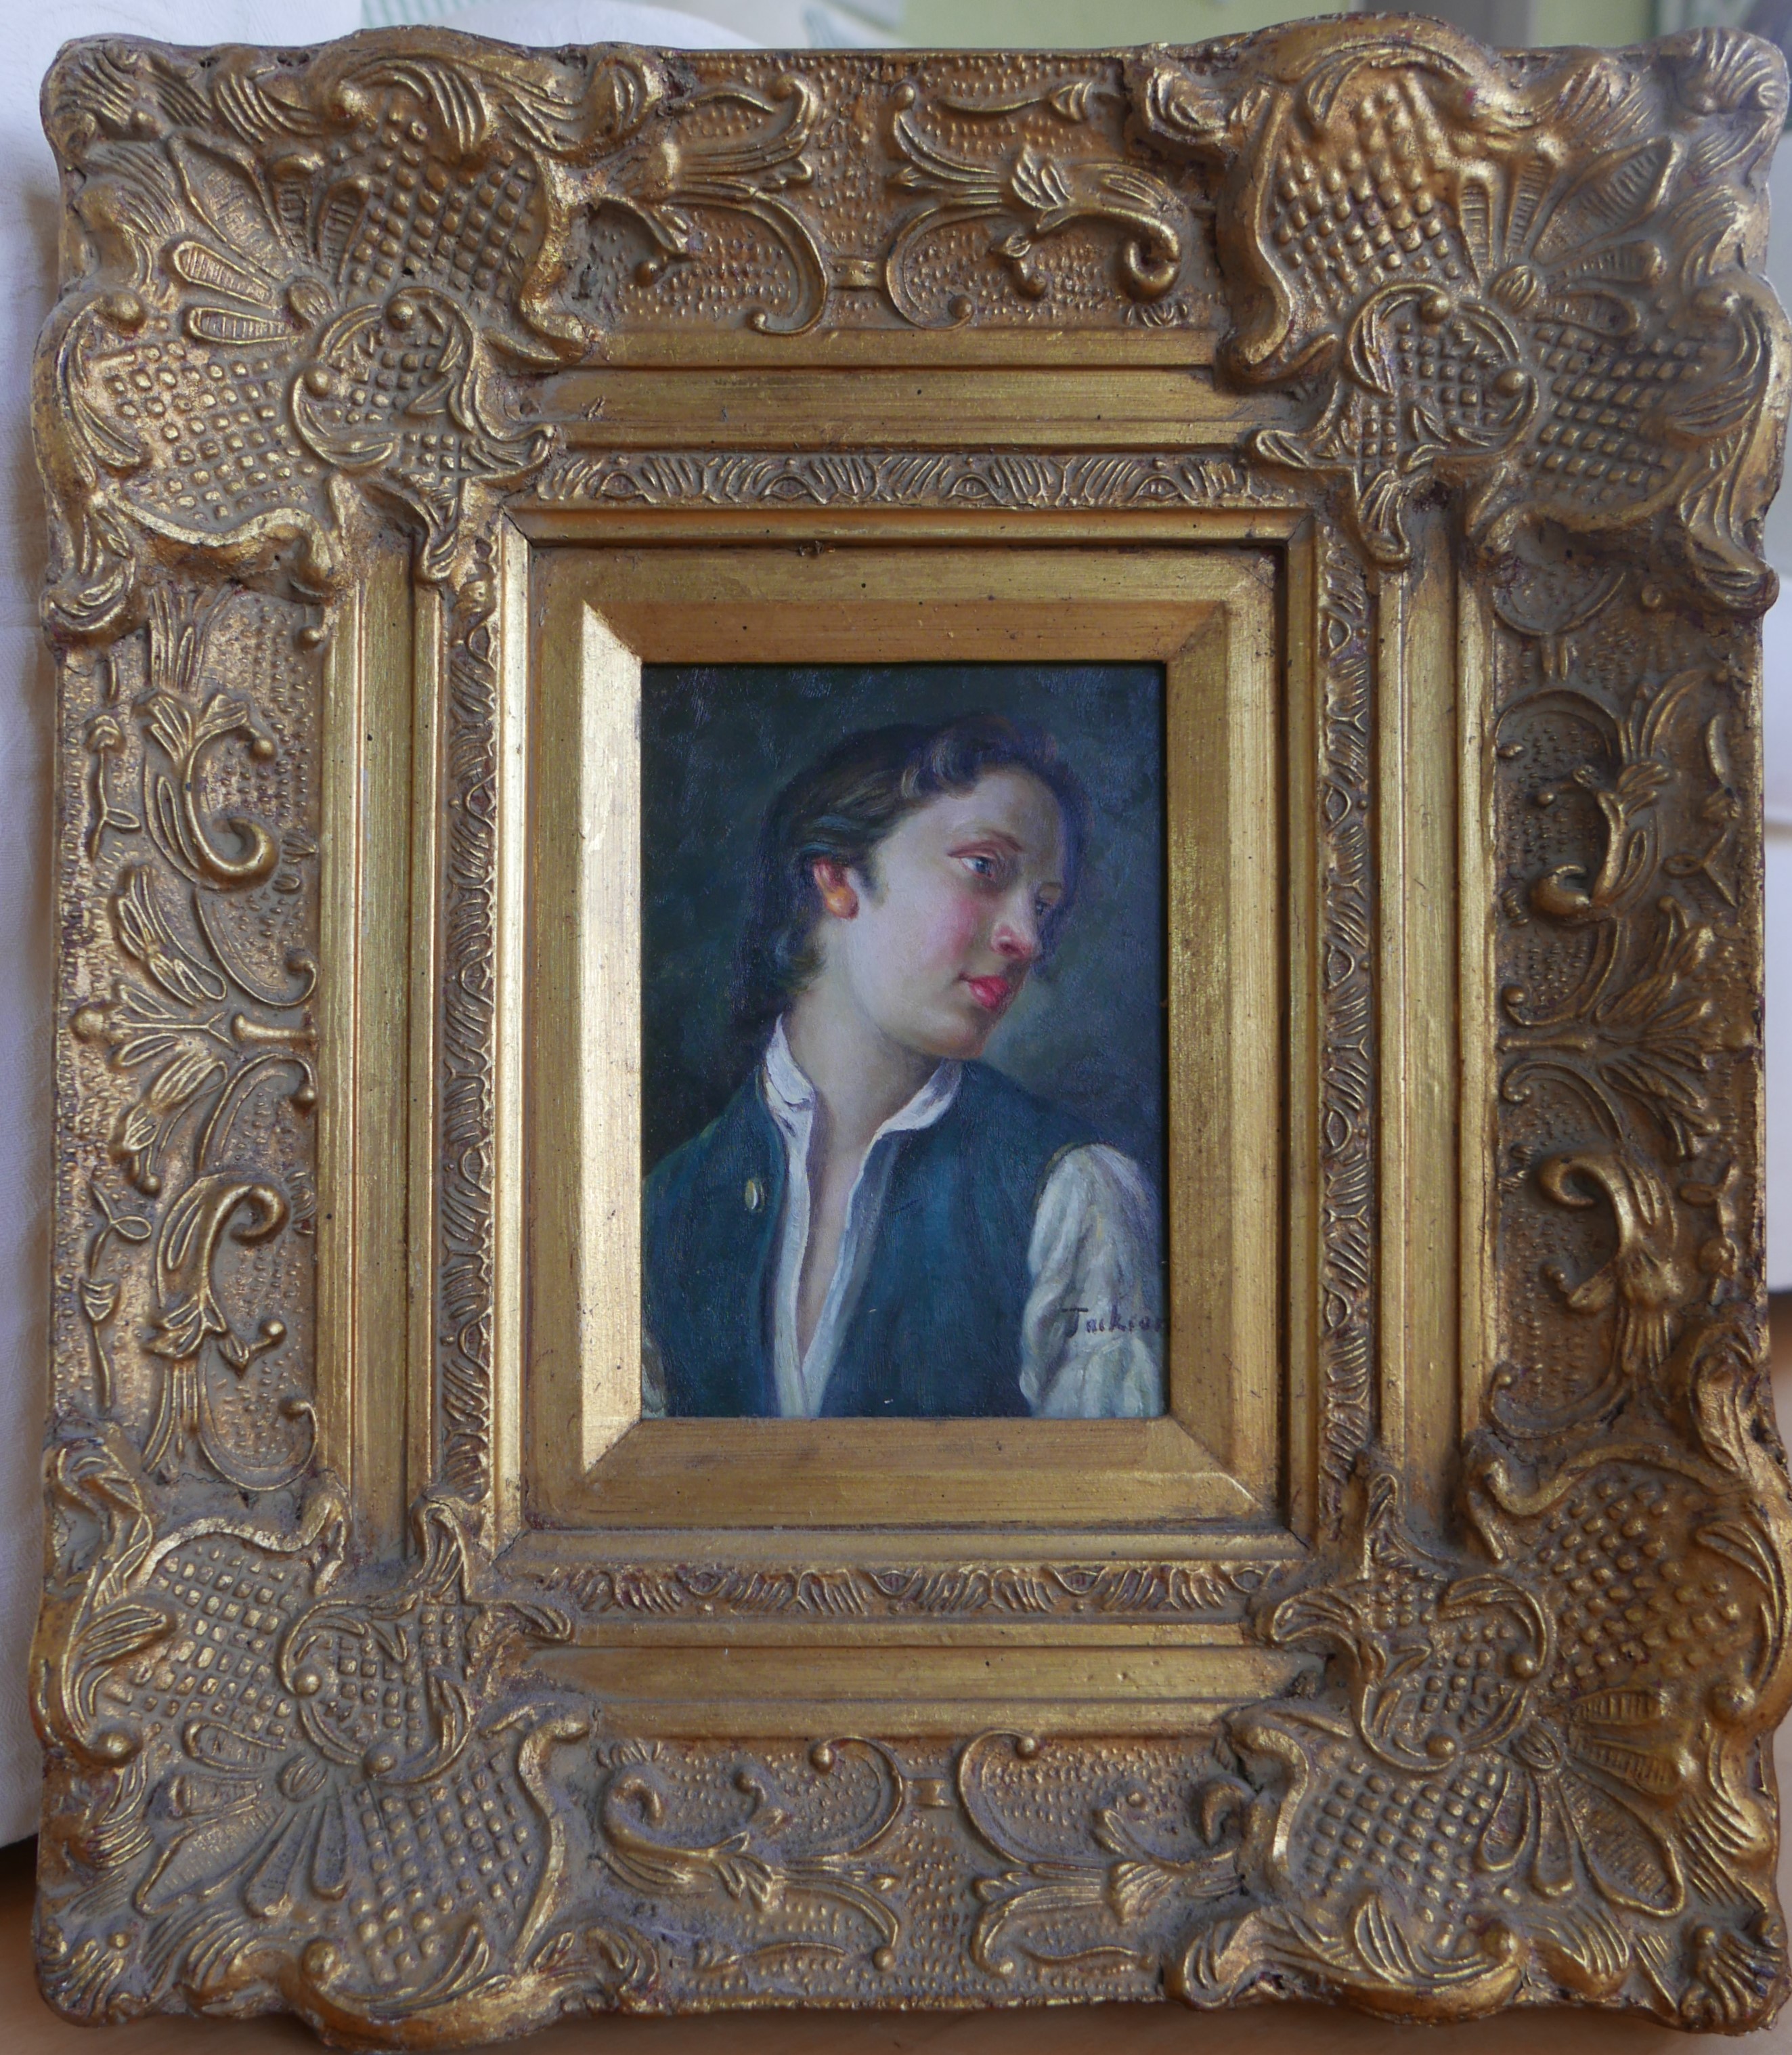 Original Oil by Jackson- "Portrait of Young Boy" - Image 2 of 3